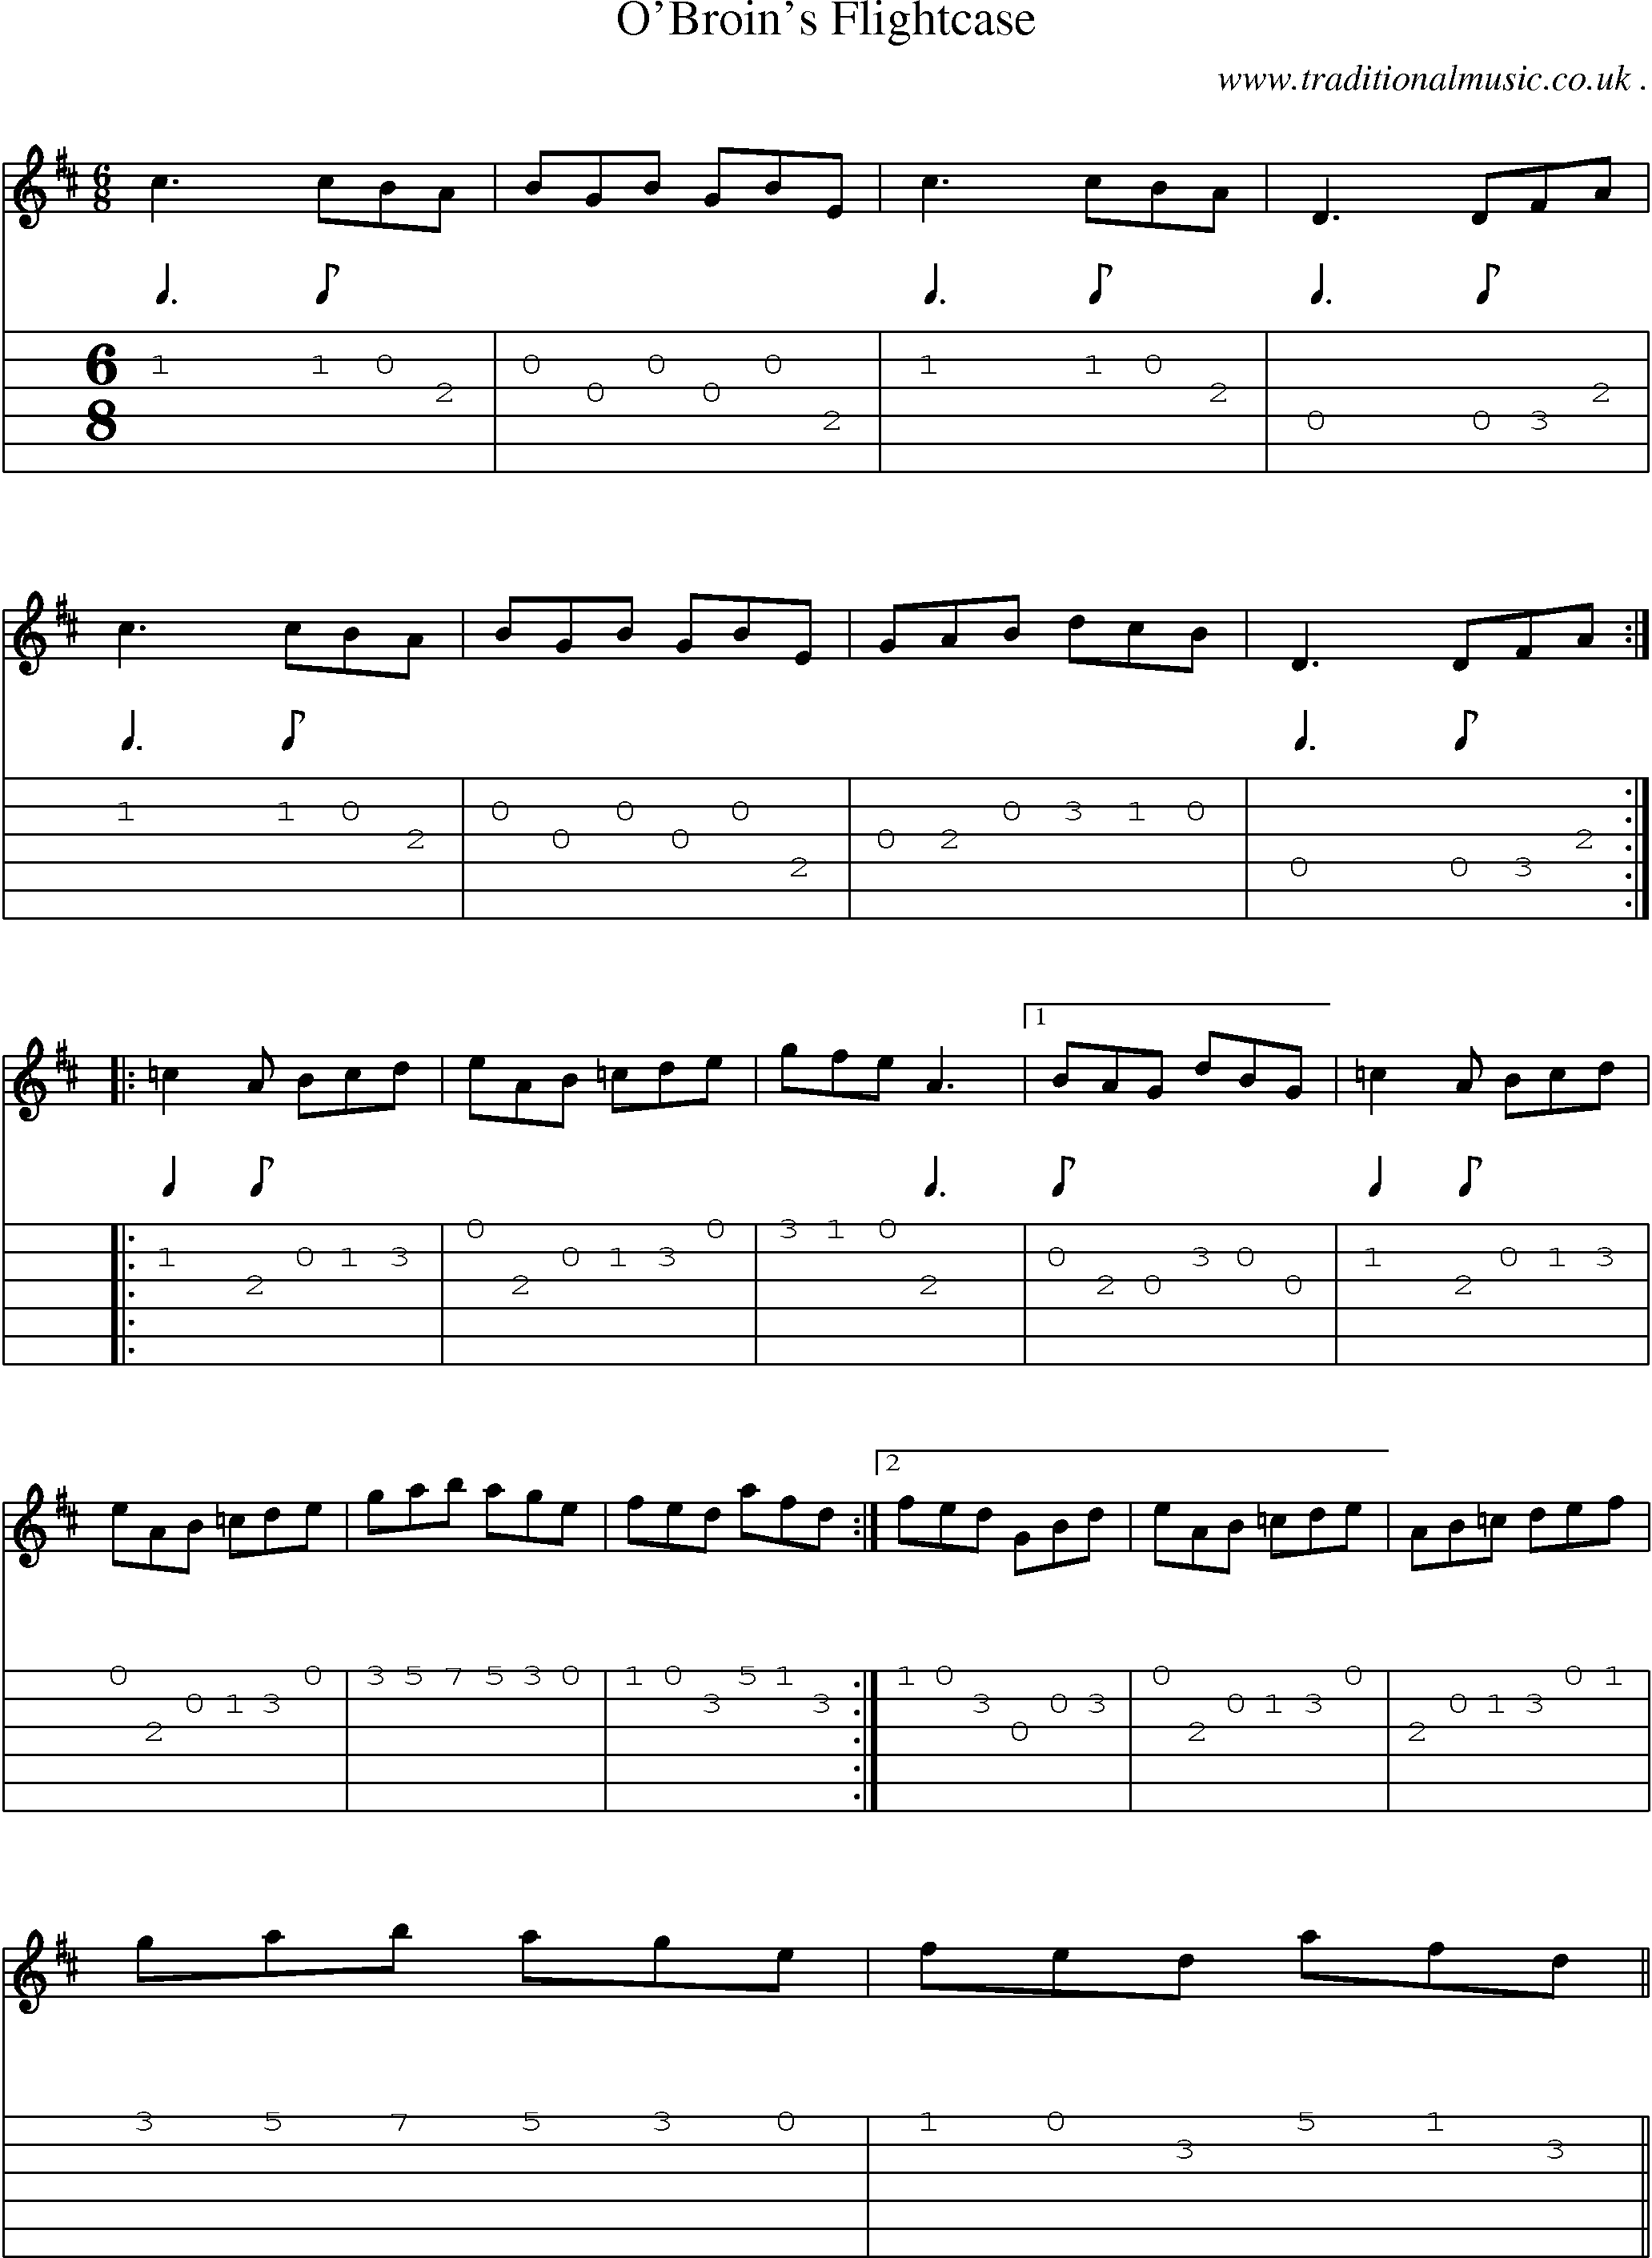 Sheet-Music and Guitar Tabs for Obroins Flightcase